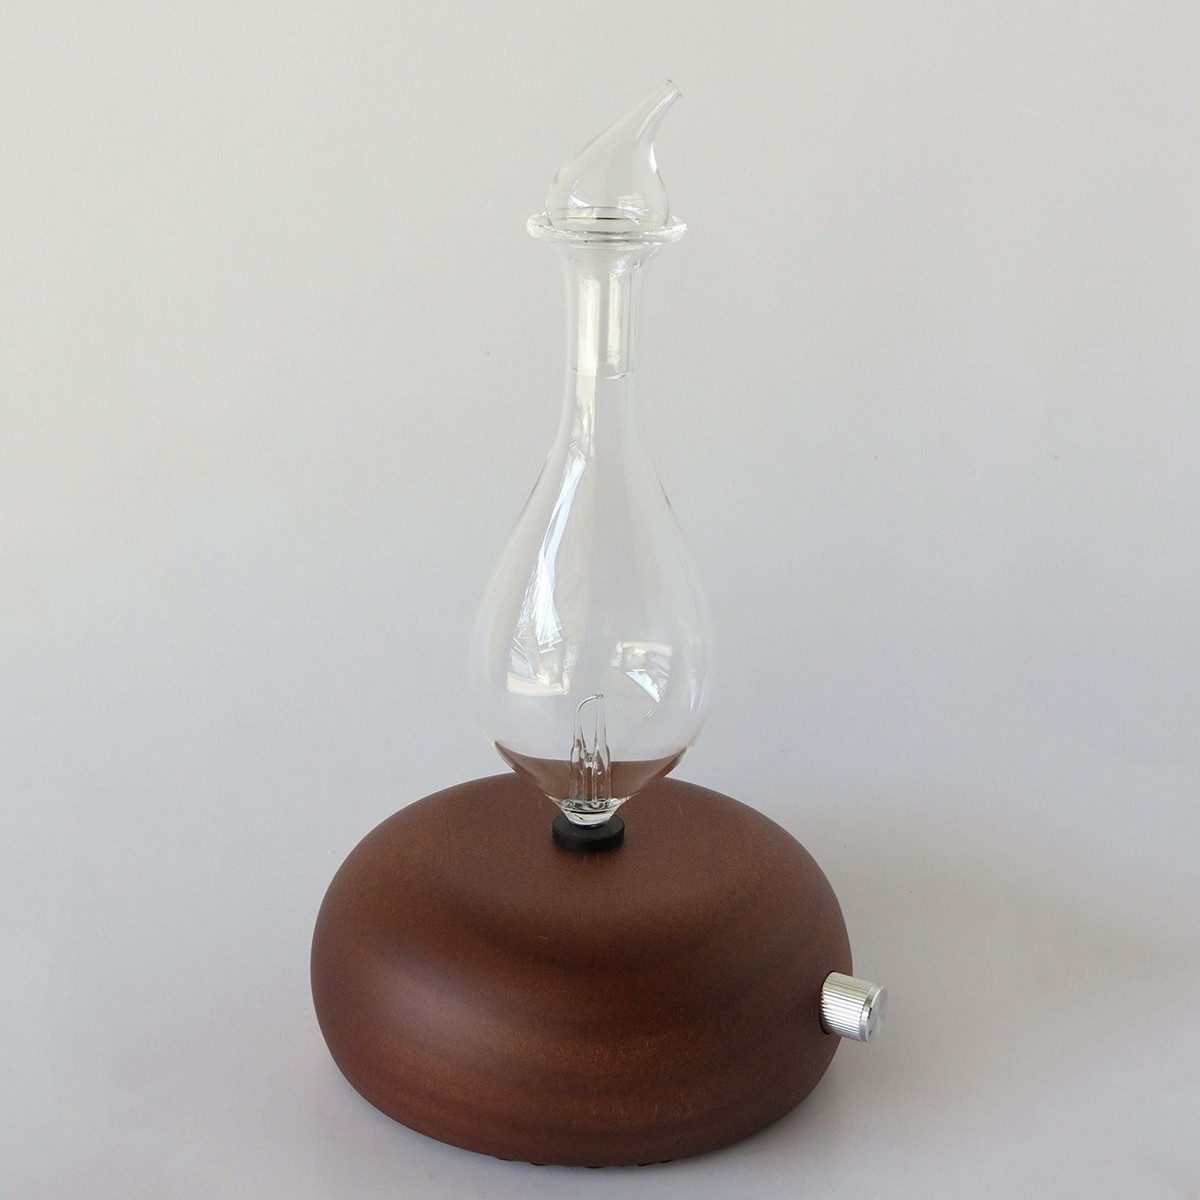 Wood-amp-Glass-Pure-Essential-Oils-Diffuser-Aromatherapy-Machine-Air-Nebulizer-Adjustable-1108401